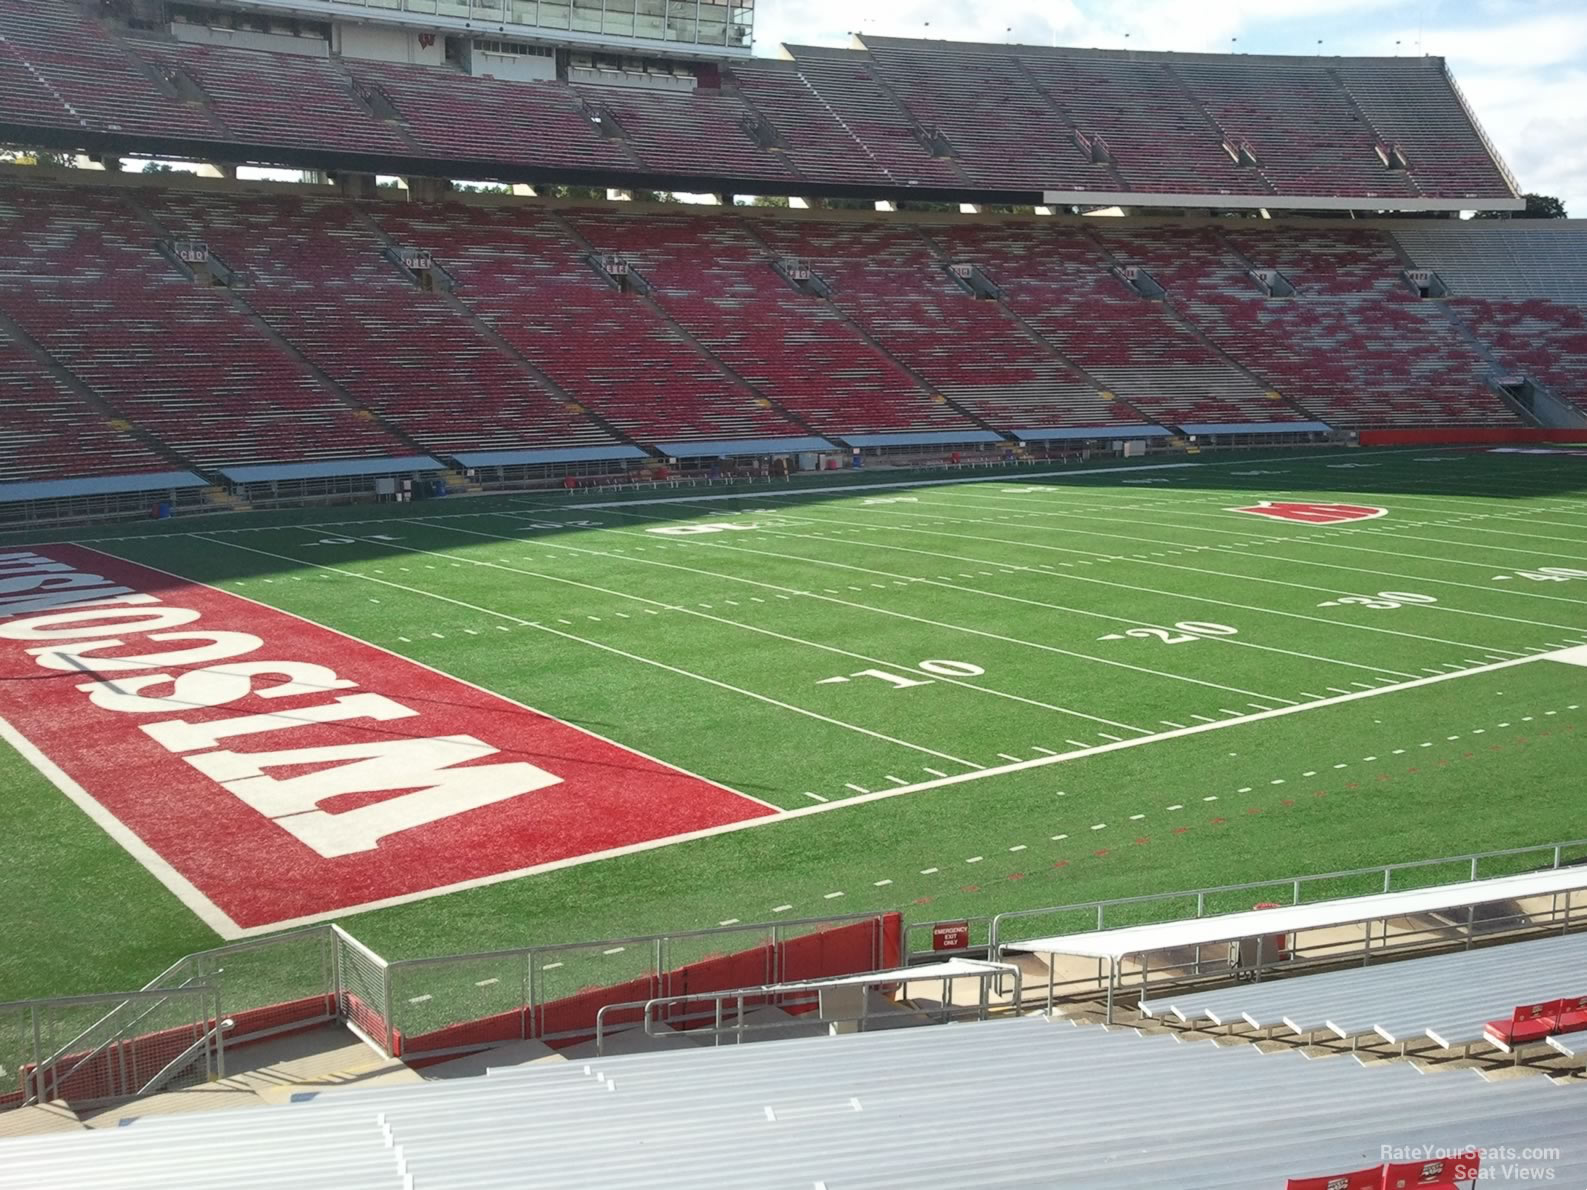 section x, row 30 seat view  - camp randall stadium